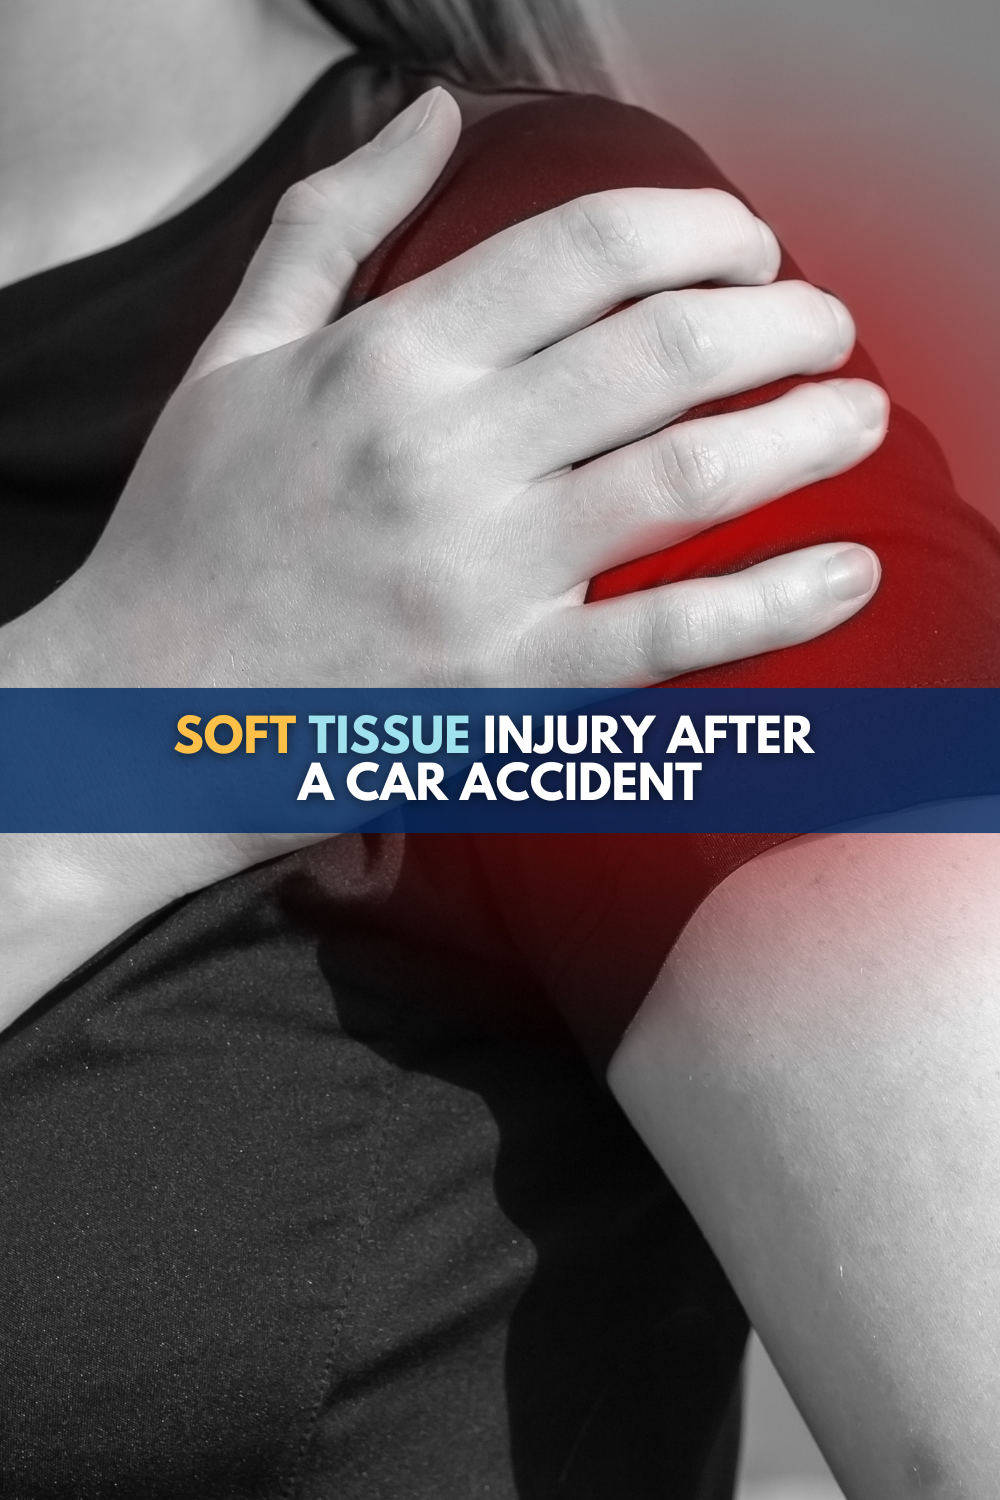 Soft Tissue Injury After Car Accident: What You Need To Know